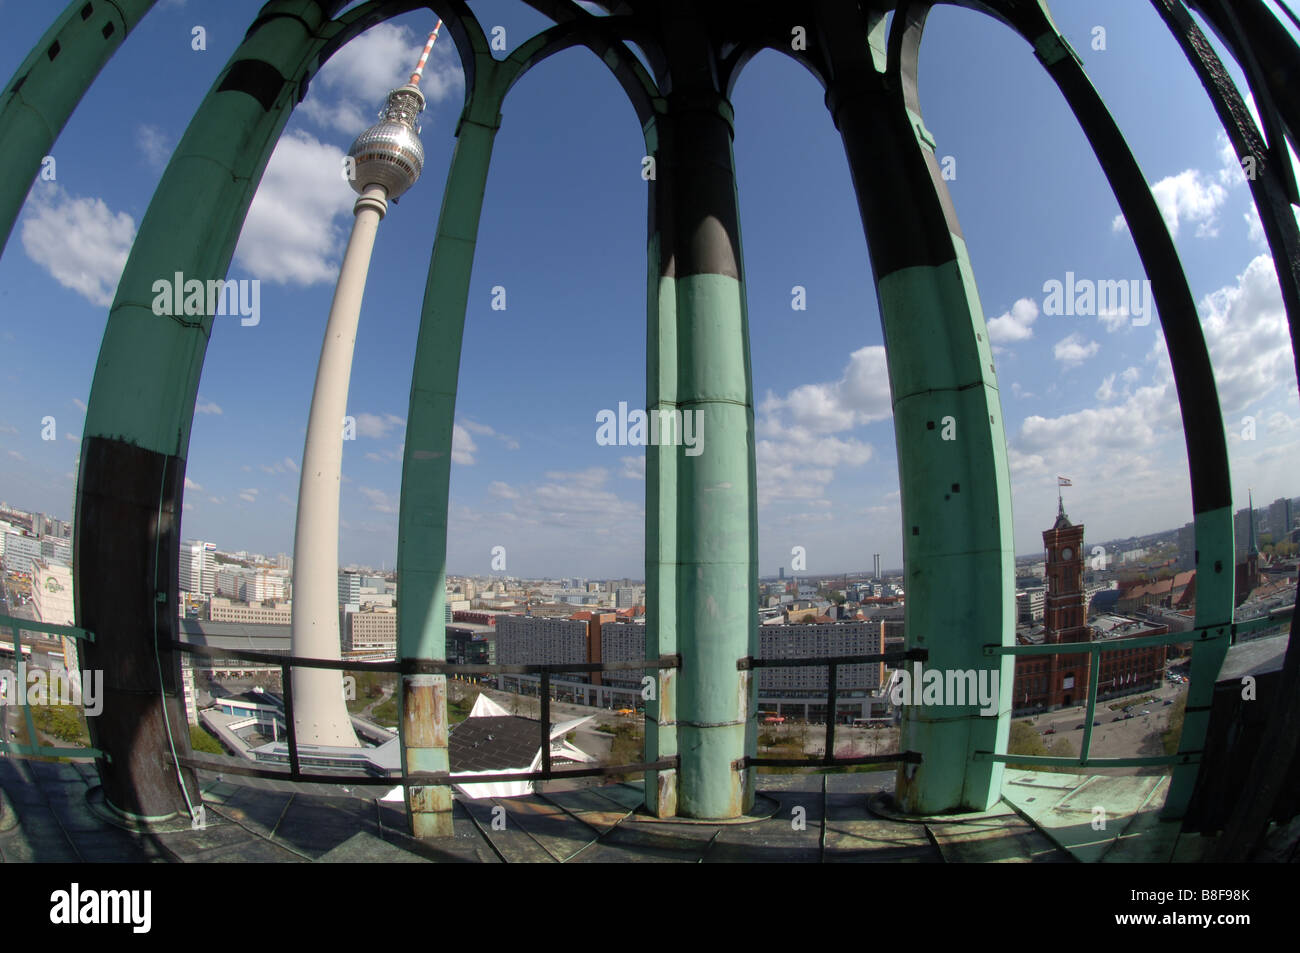 Tv Tower Alexanderplatz berlin germany view from st. marien church towards red town hall Stock Photo